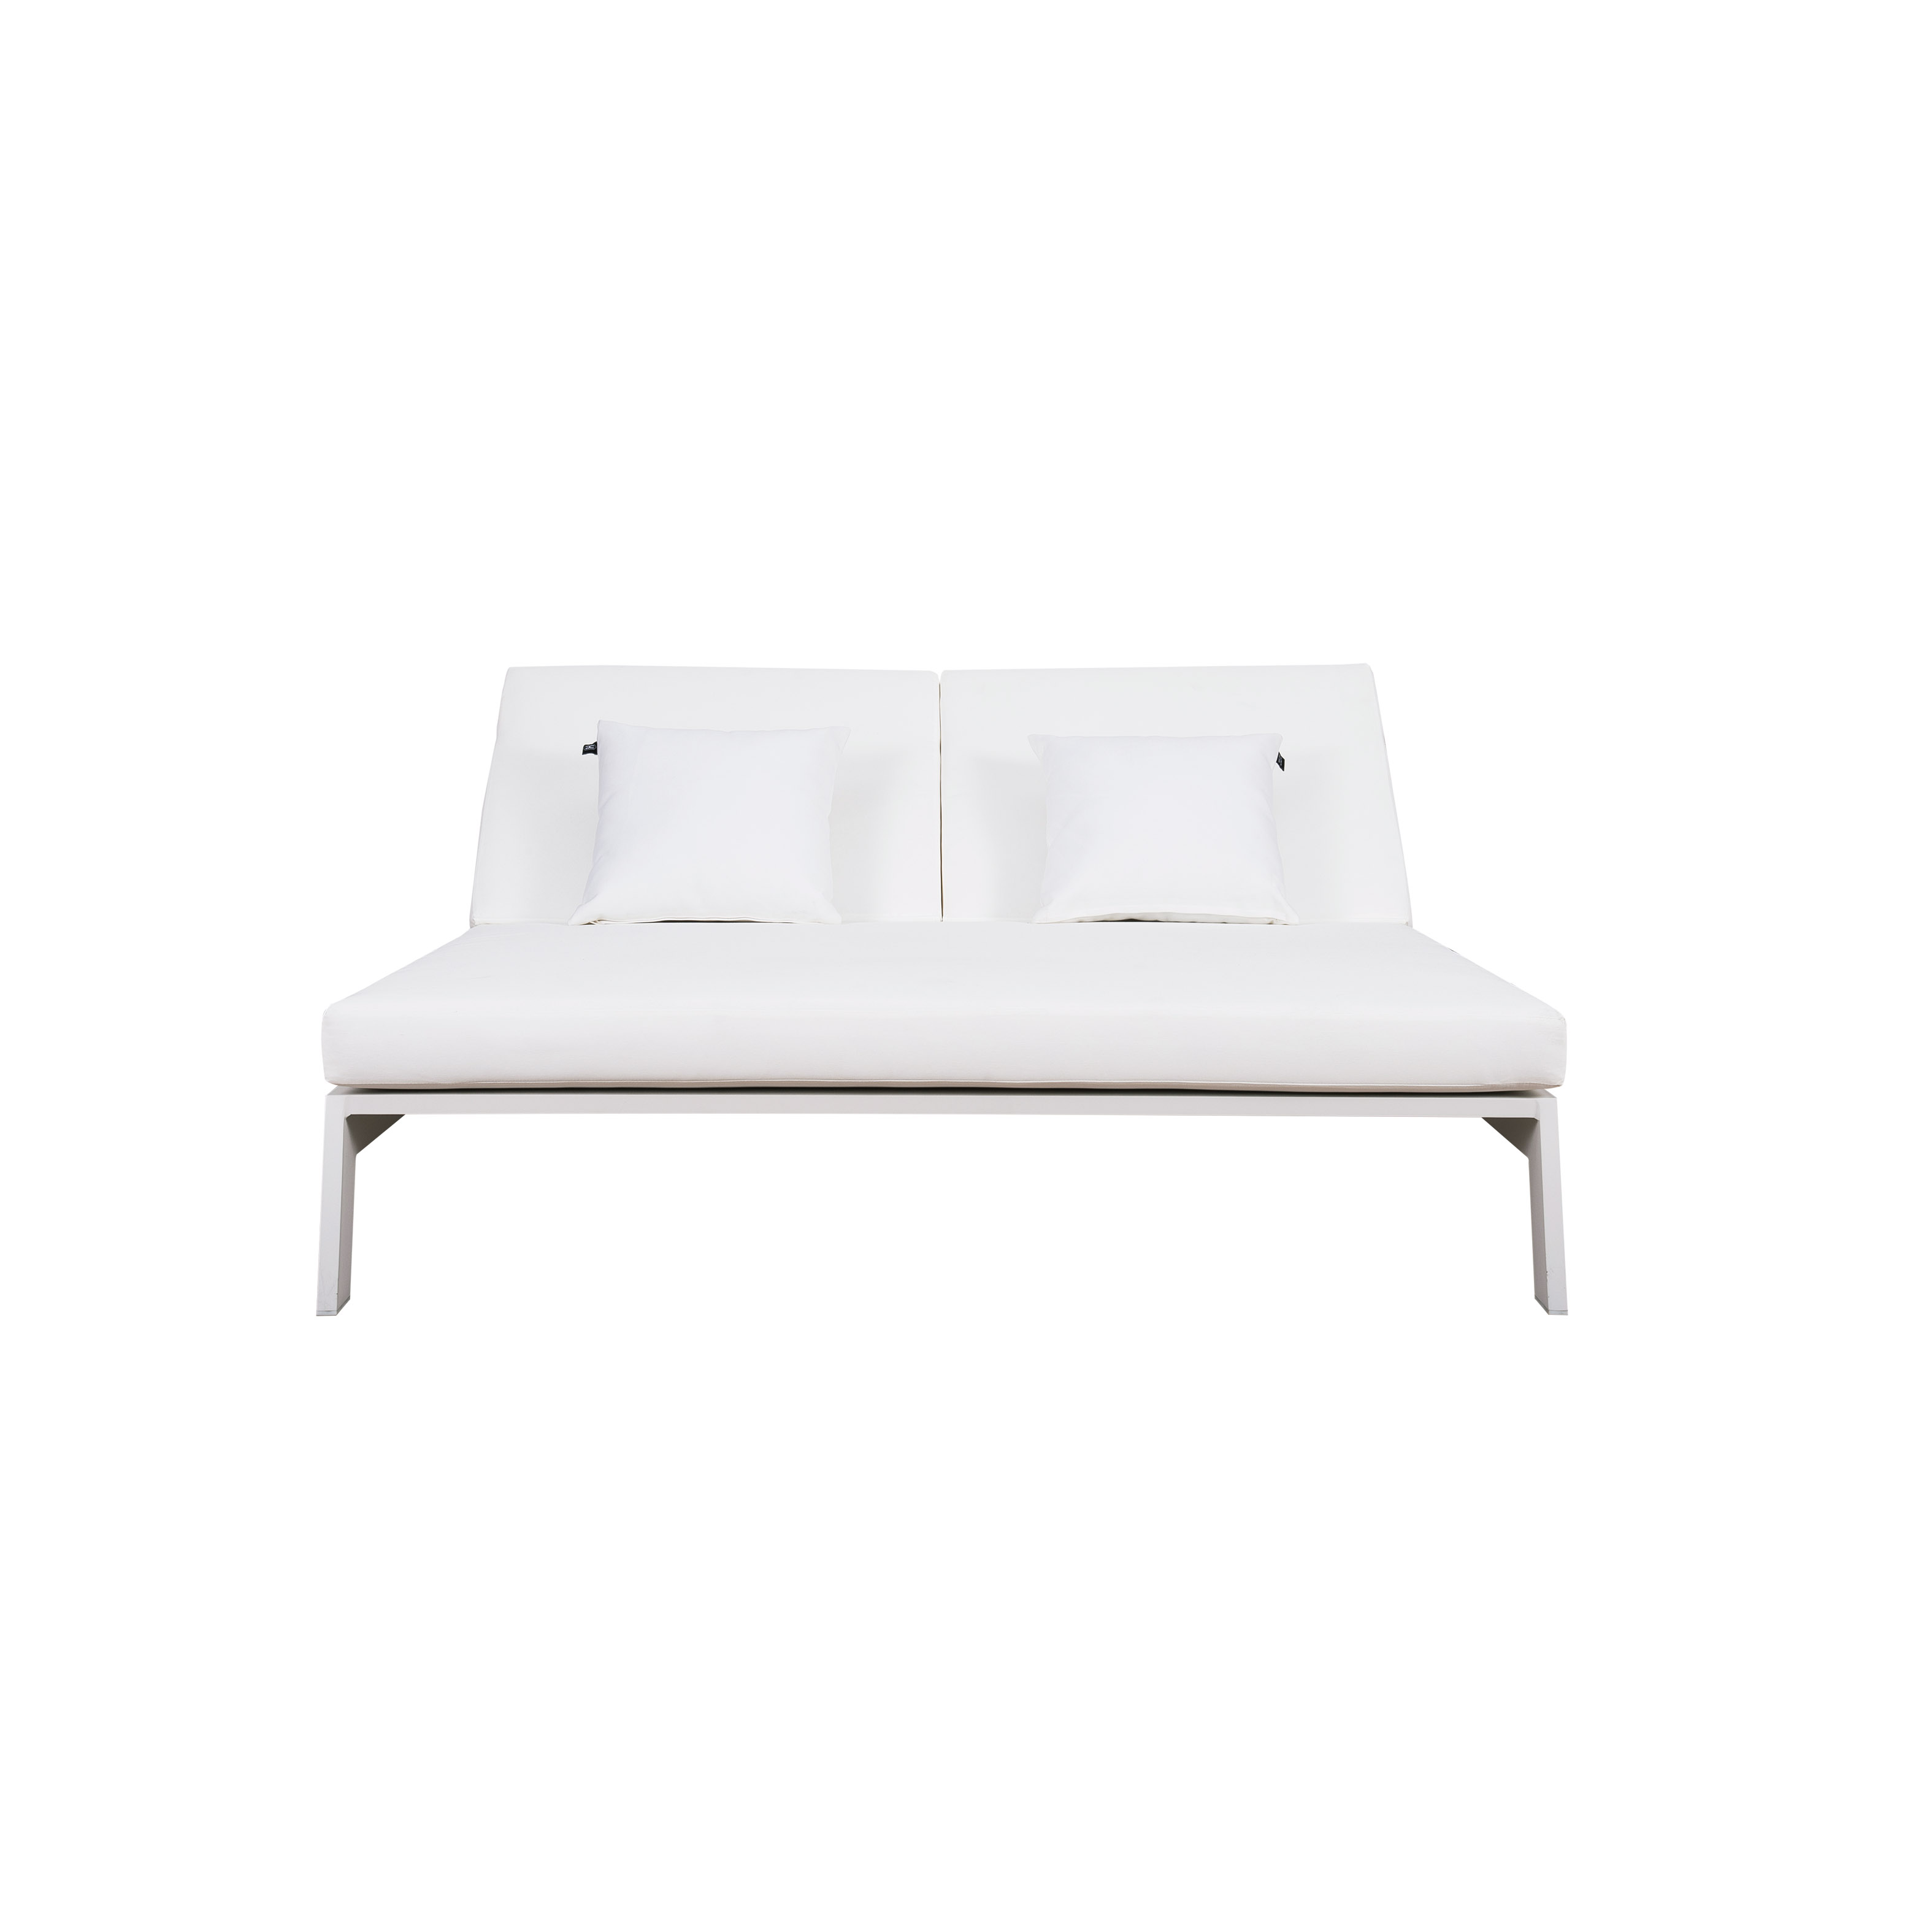 Casa alu. double daybed S7